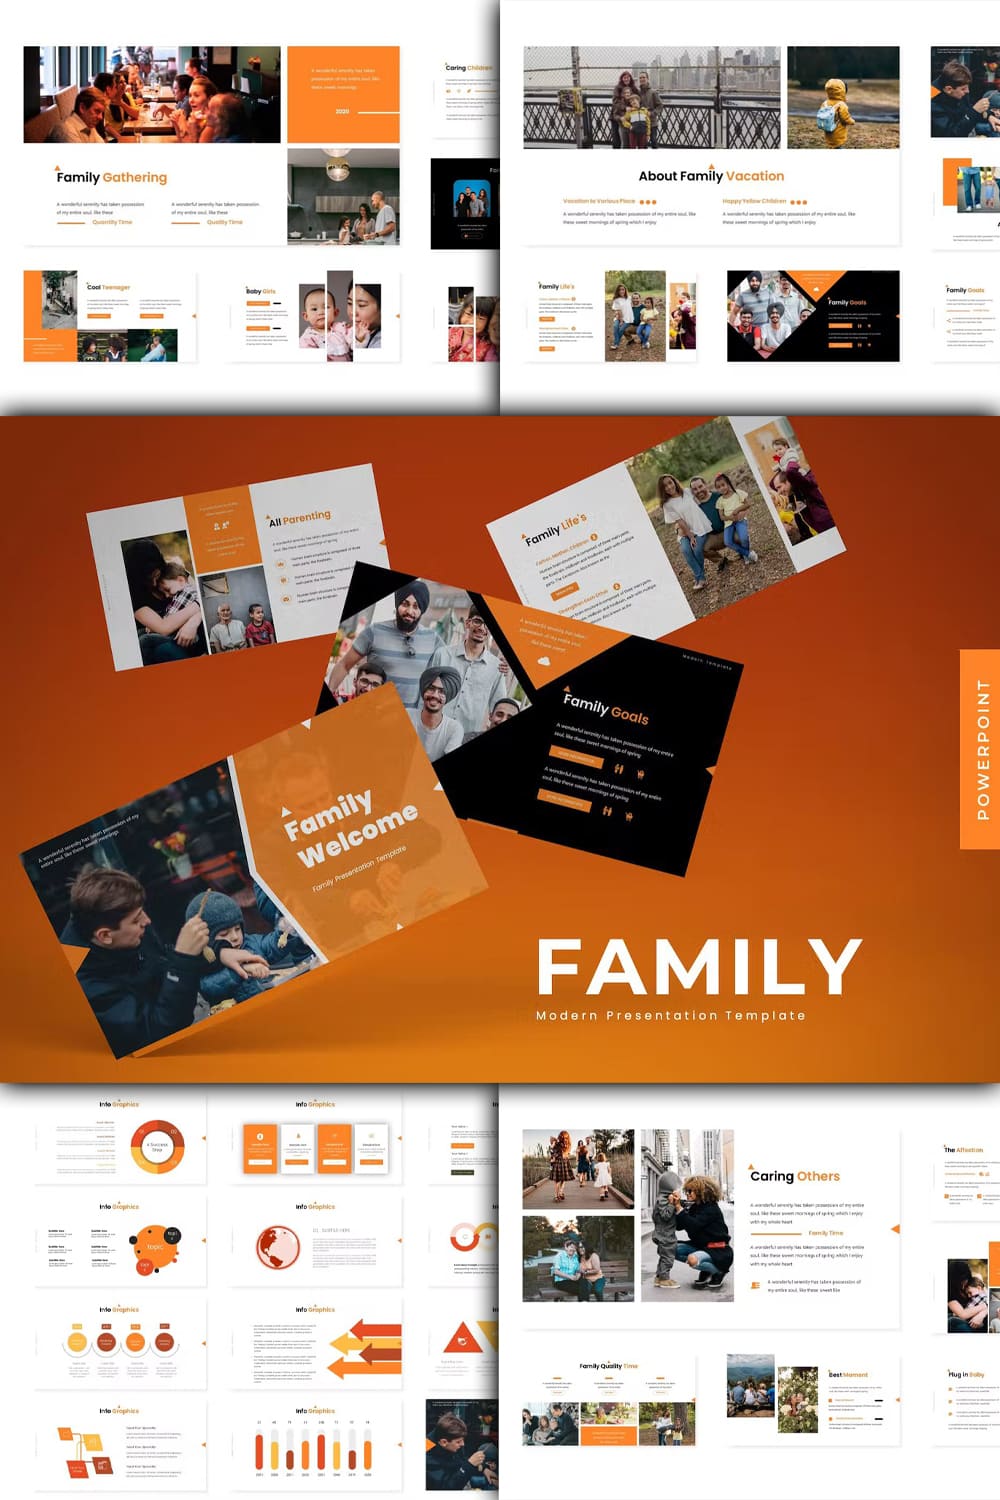 Welcome family powerpoint template - pinterest image preview.